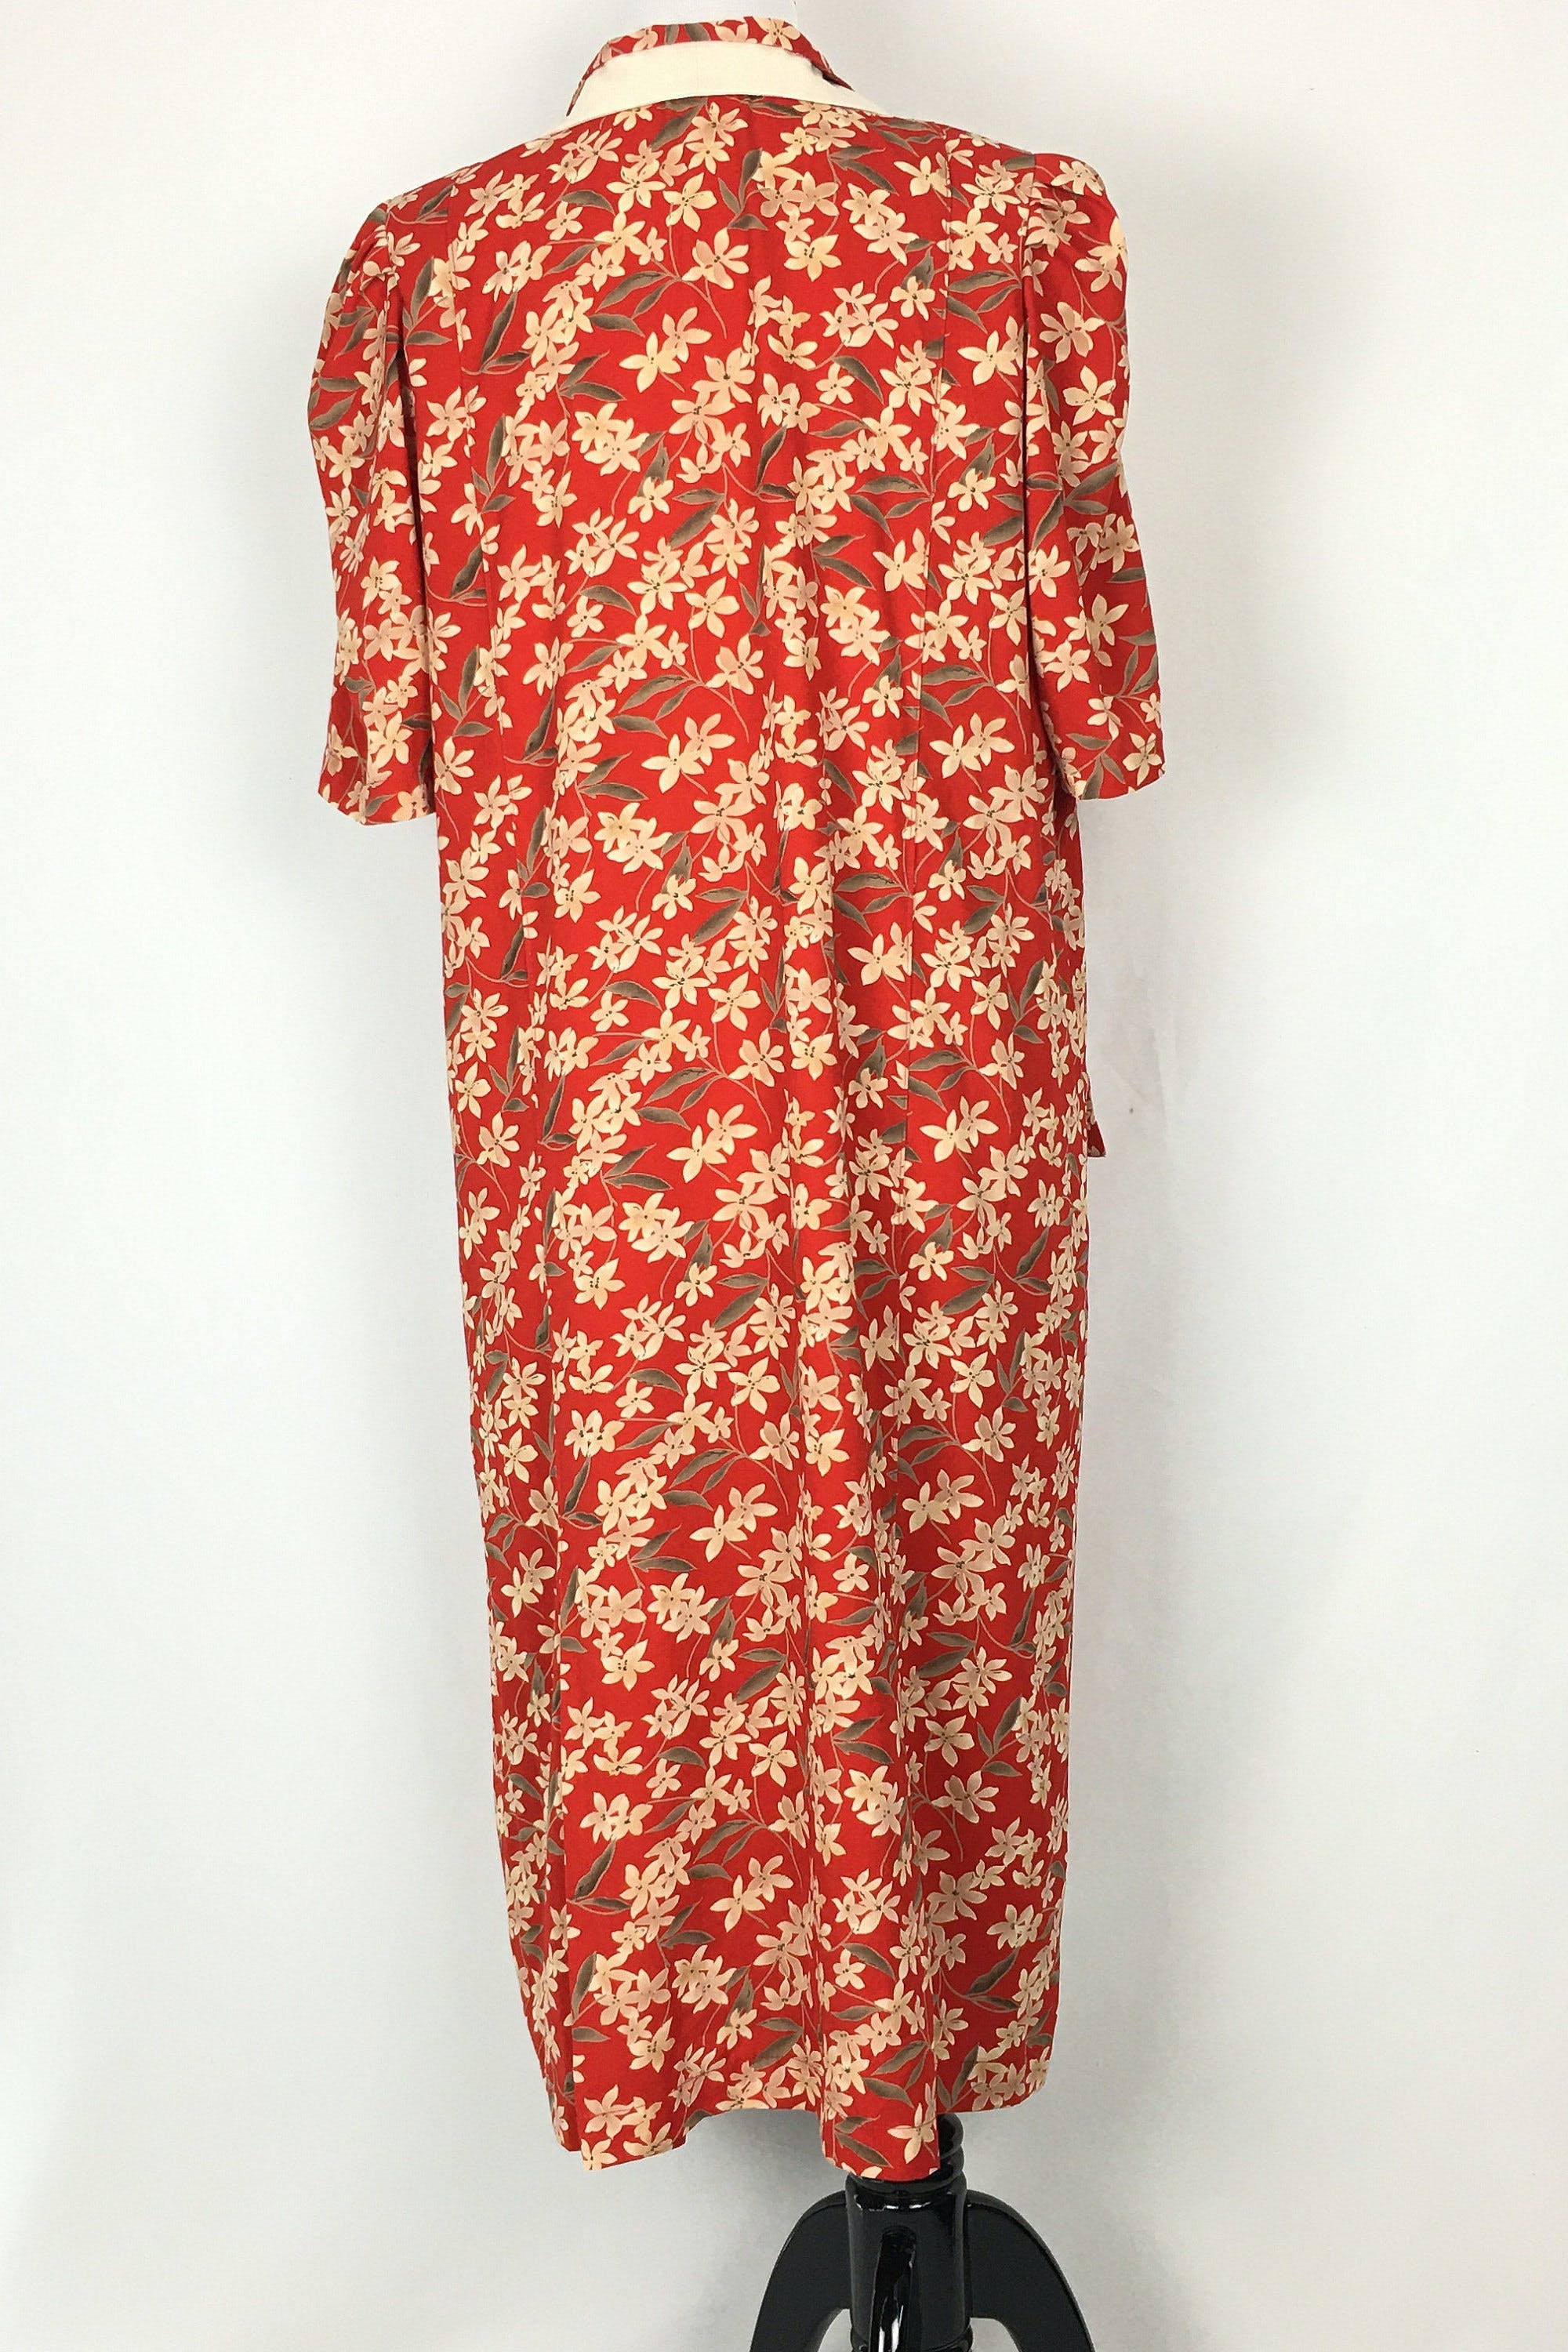 Vintage 80's Red and Cream Floral Button Front Shift Dress | Shop THRILLING